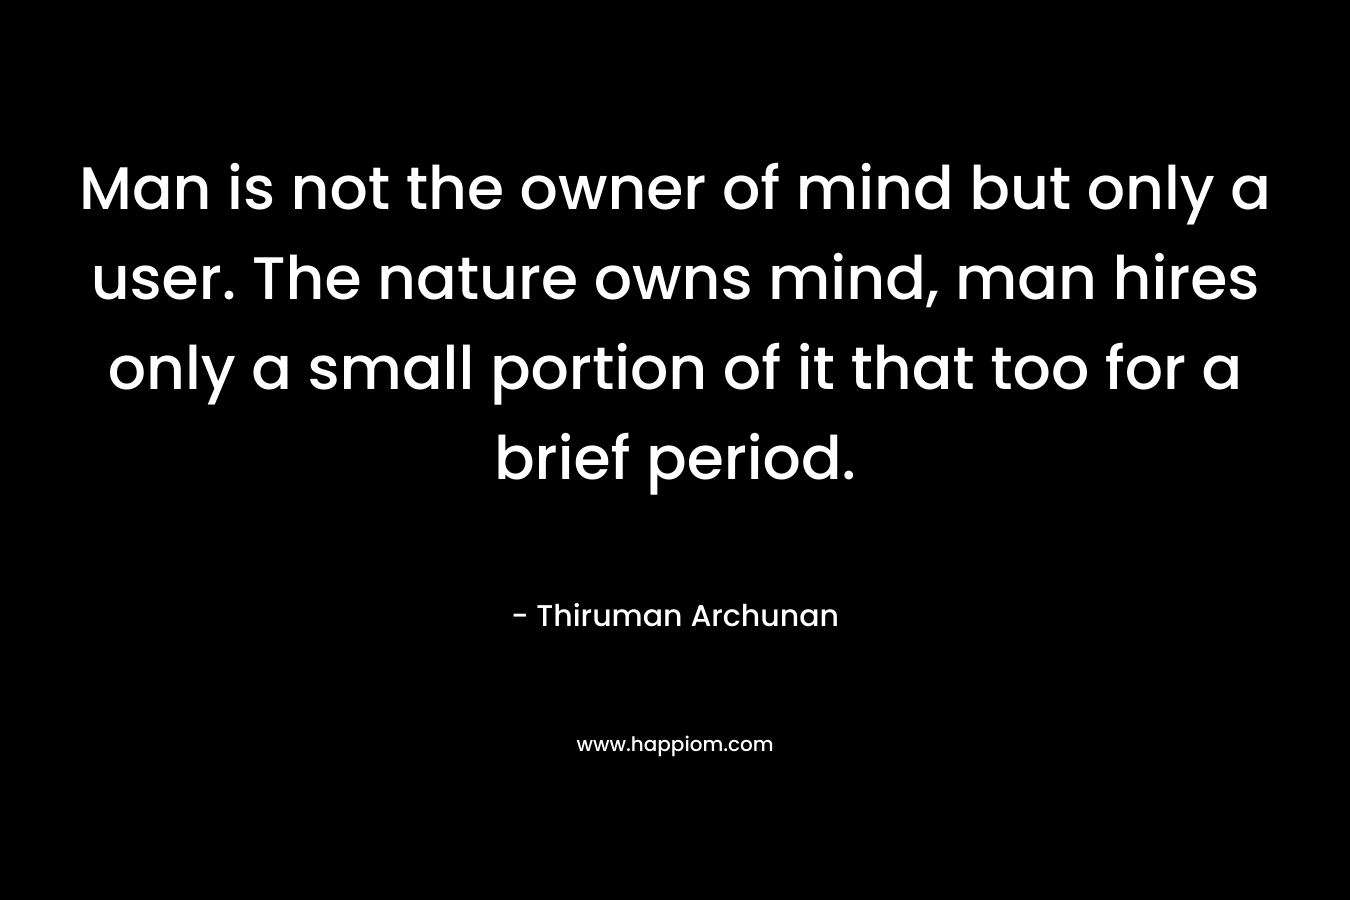 Man is not the owner of mind but only a user. The nature owns mind, man hires only a small portion of it that too for a brief period. – Thiruman Archunan